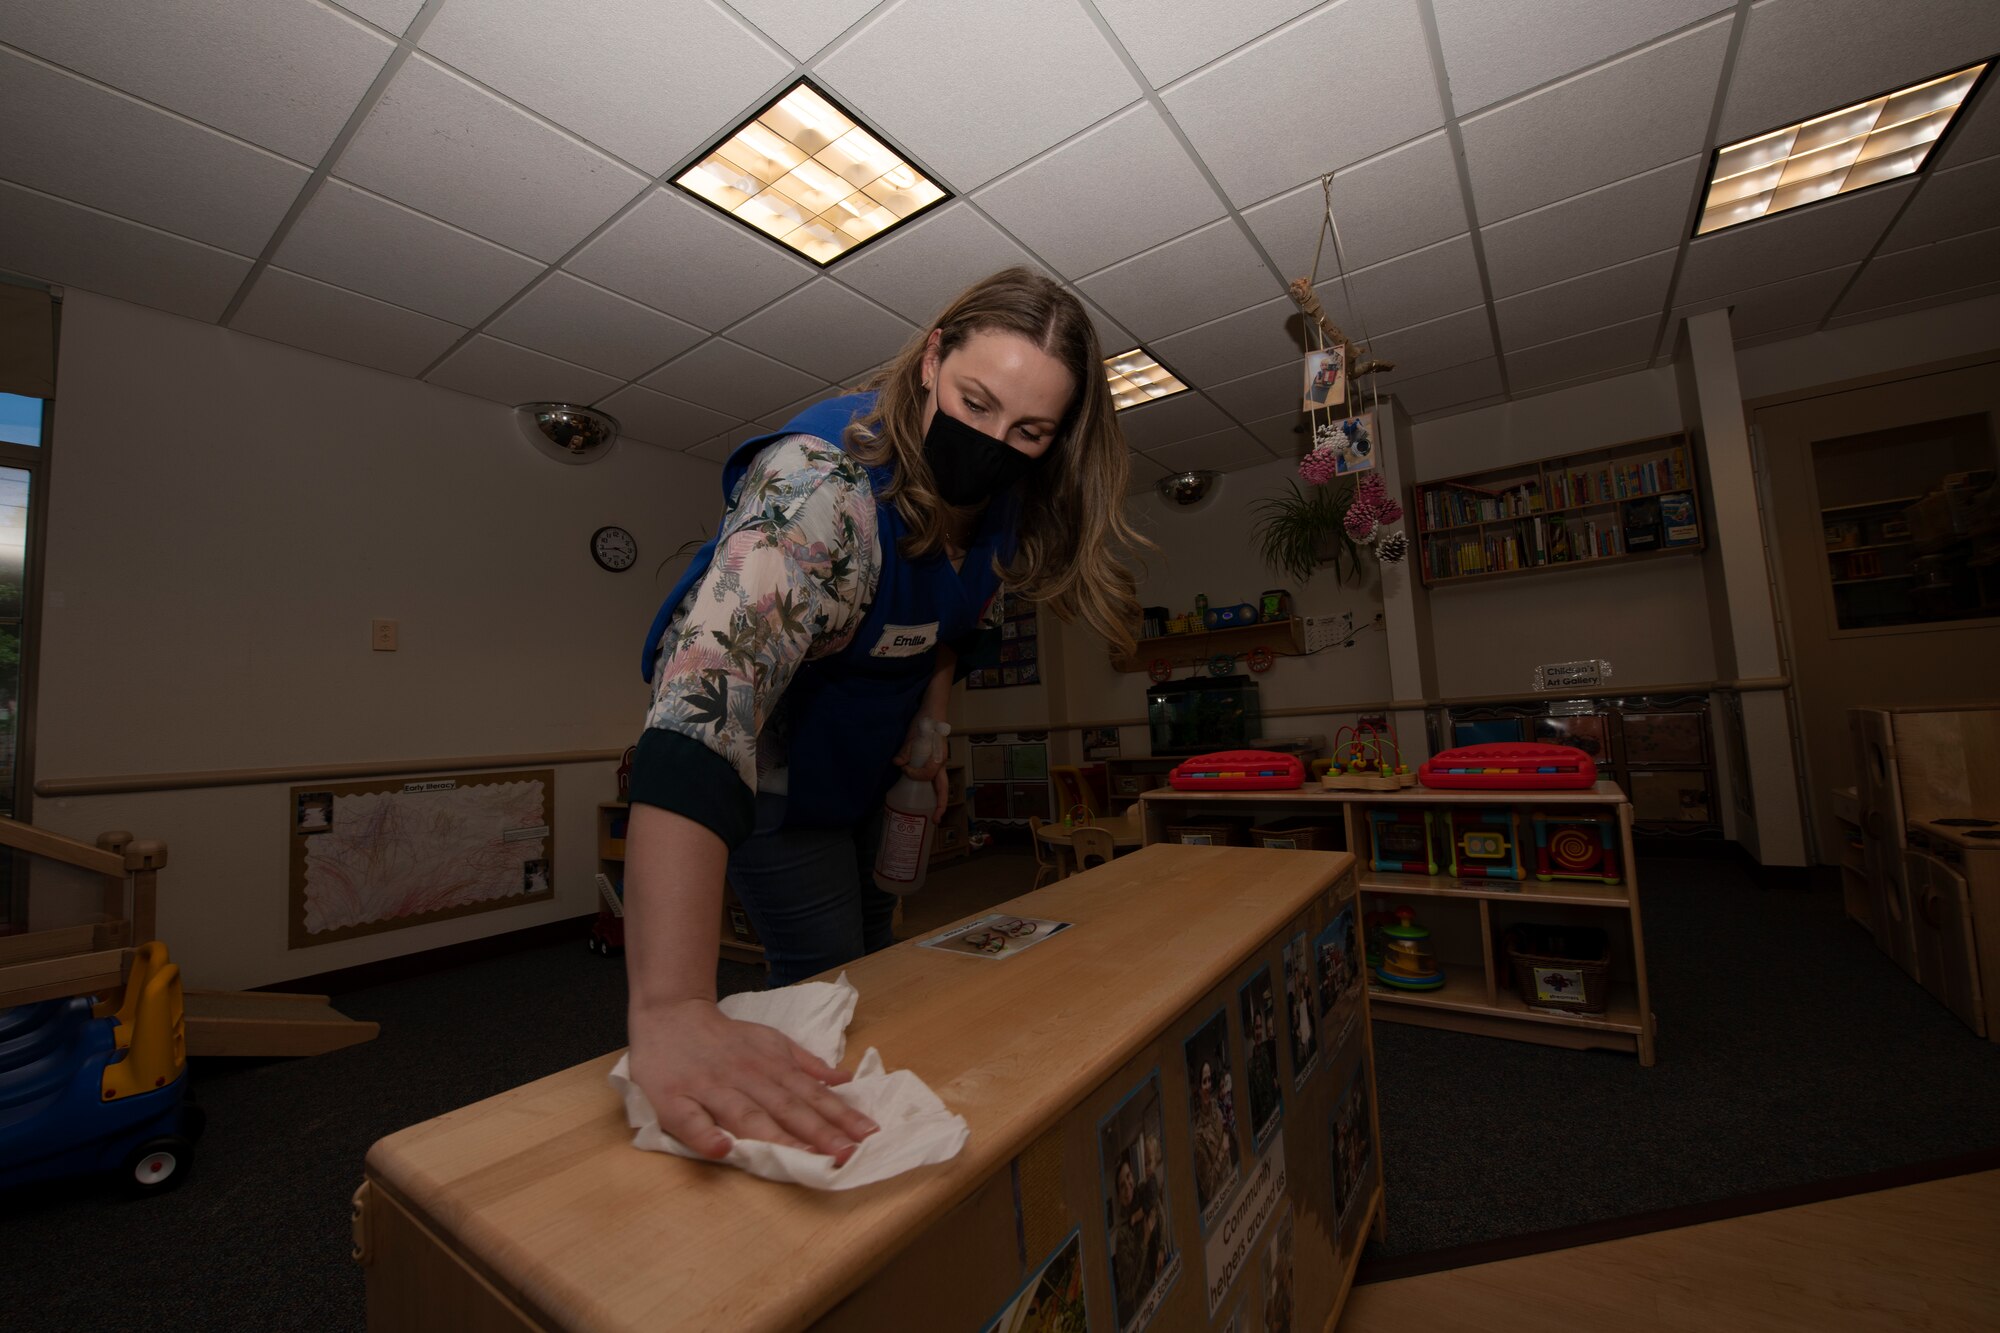 Emilia Williams, 60th Force Support Squadron child and youth program technician, wipes down a shelf May 1, 2020, in a pre-toddler room inside Child Development Center 3 at Travis Air Force Base, California. Since the coronavirus pandemic hit the United States, the CDC staff at Travis AFB implemented more frequent cleaning of surfaces to prevent the spread of COVID-19. (U.S. Air Force photo by Tech. Sgt. James Hodgman)